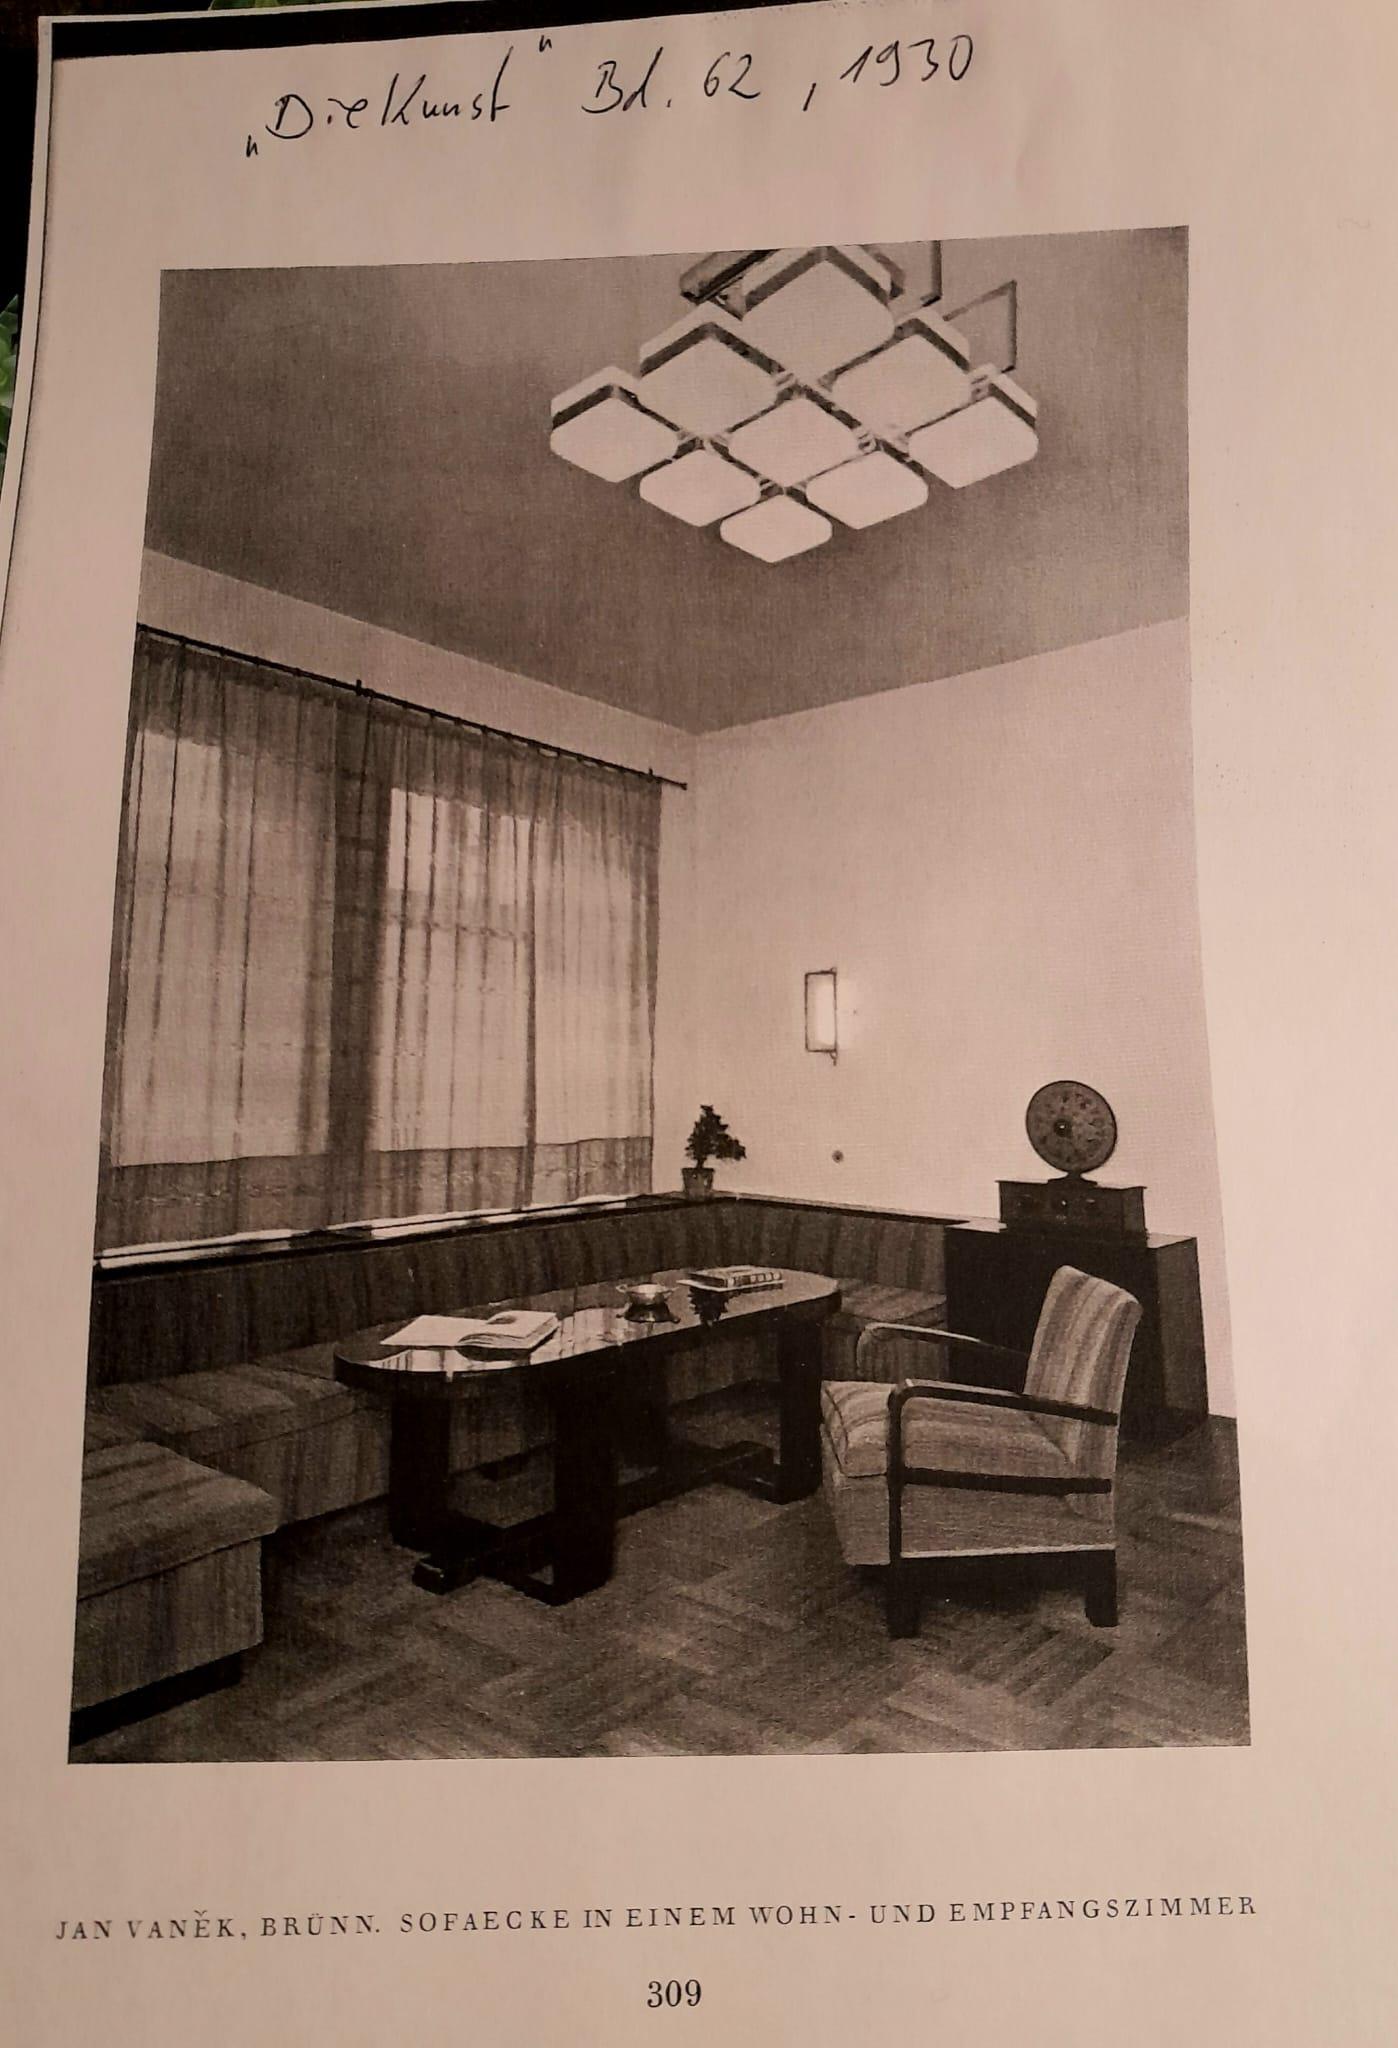 Large ceiling lamp made of nickel-plated steel with eight lamps with frosted glass shades in a square shape. The lamp is illustrated in 